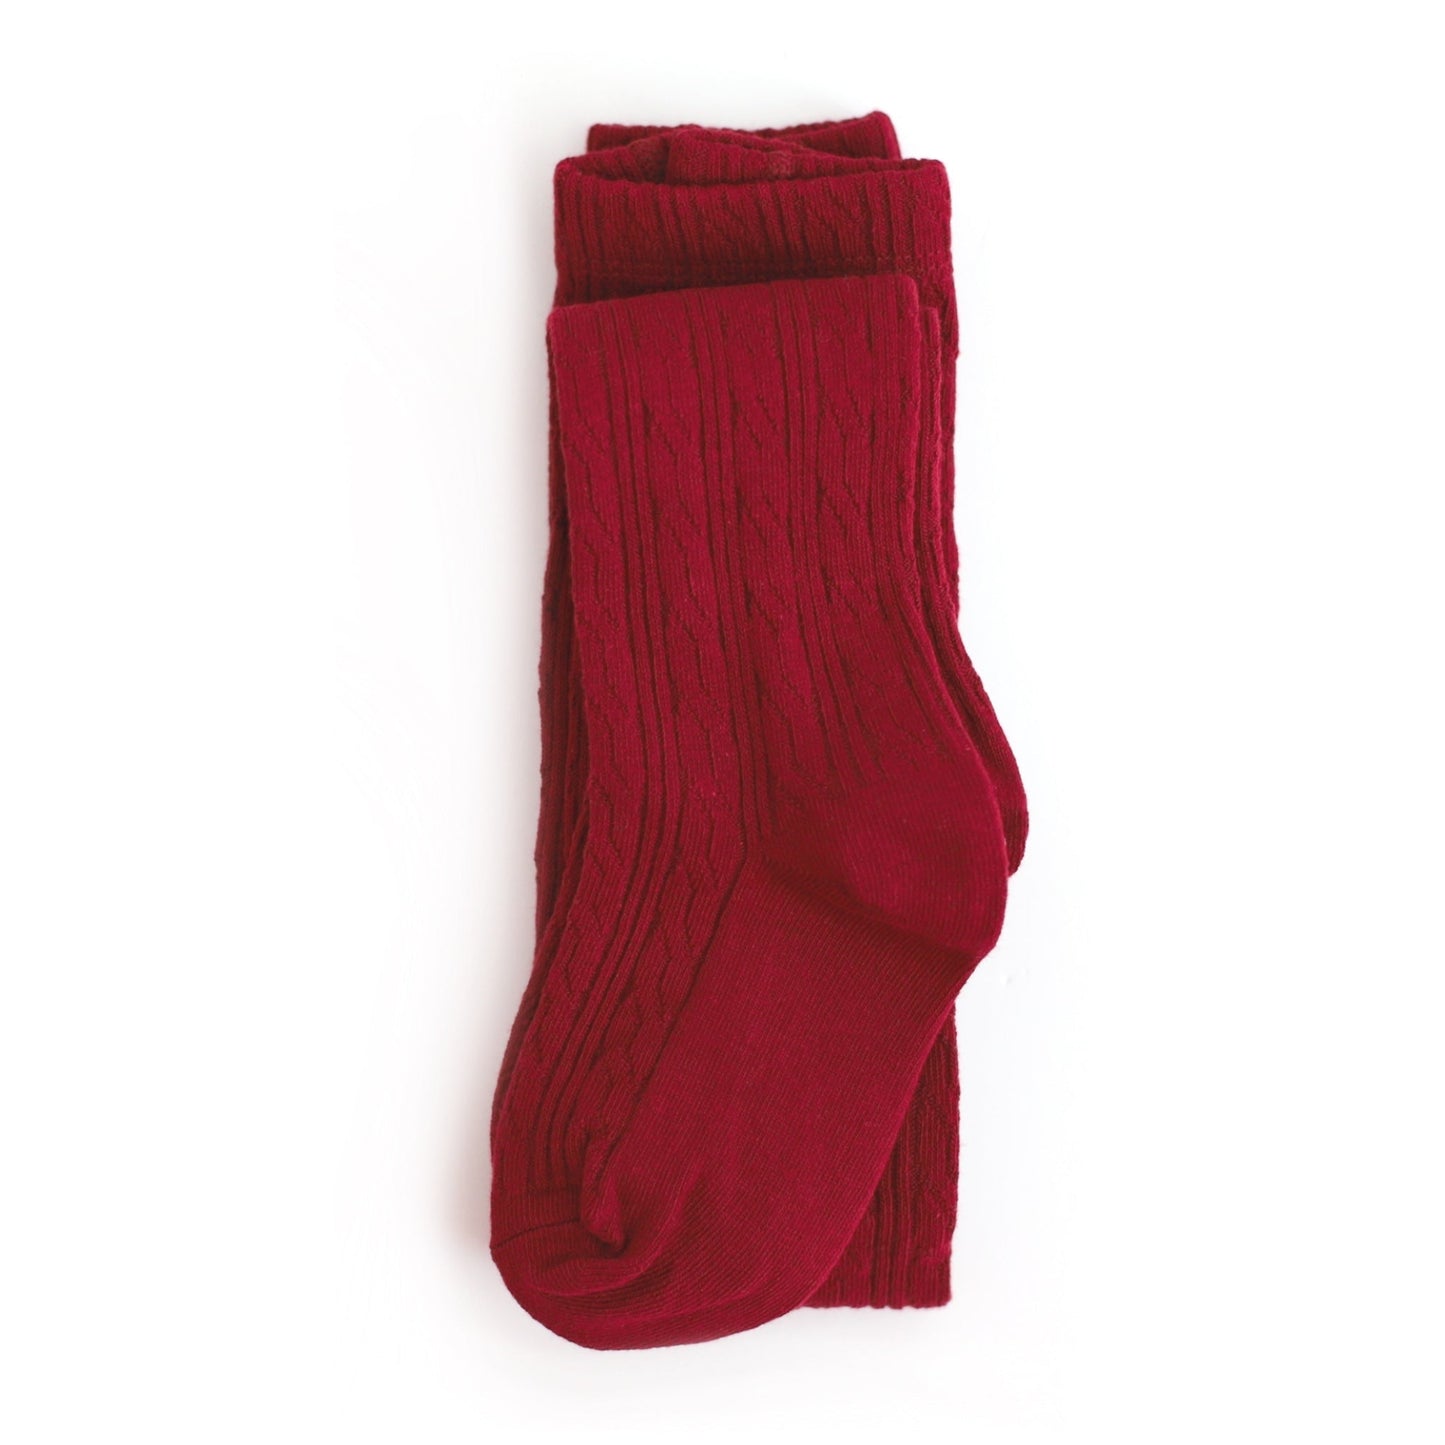 Little Stocking Co. Cable Knit Tights - Black, Crimson, Oat, or Vanilla